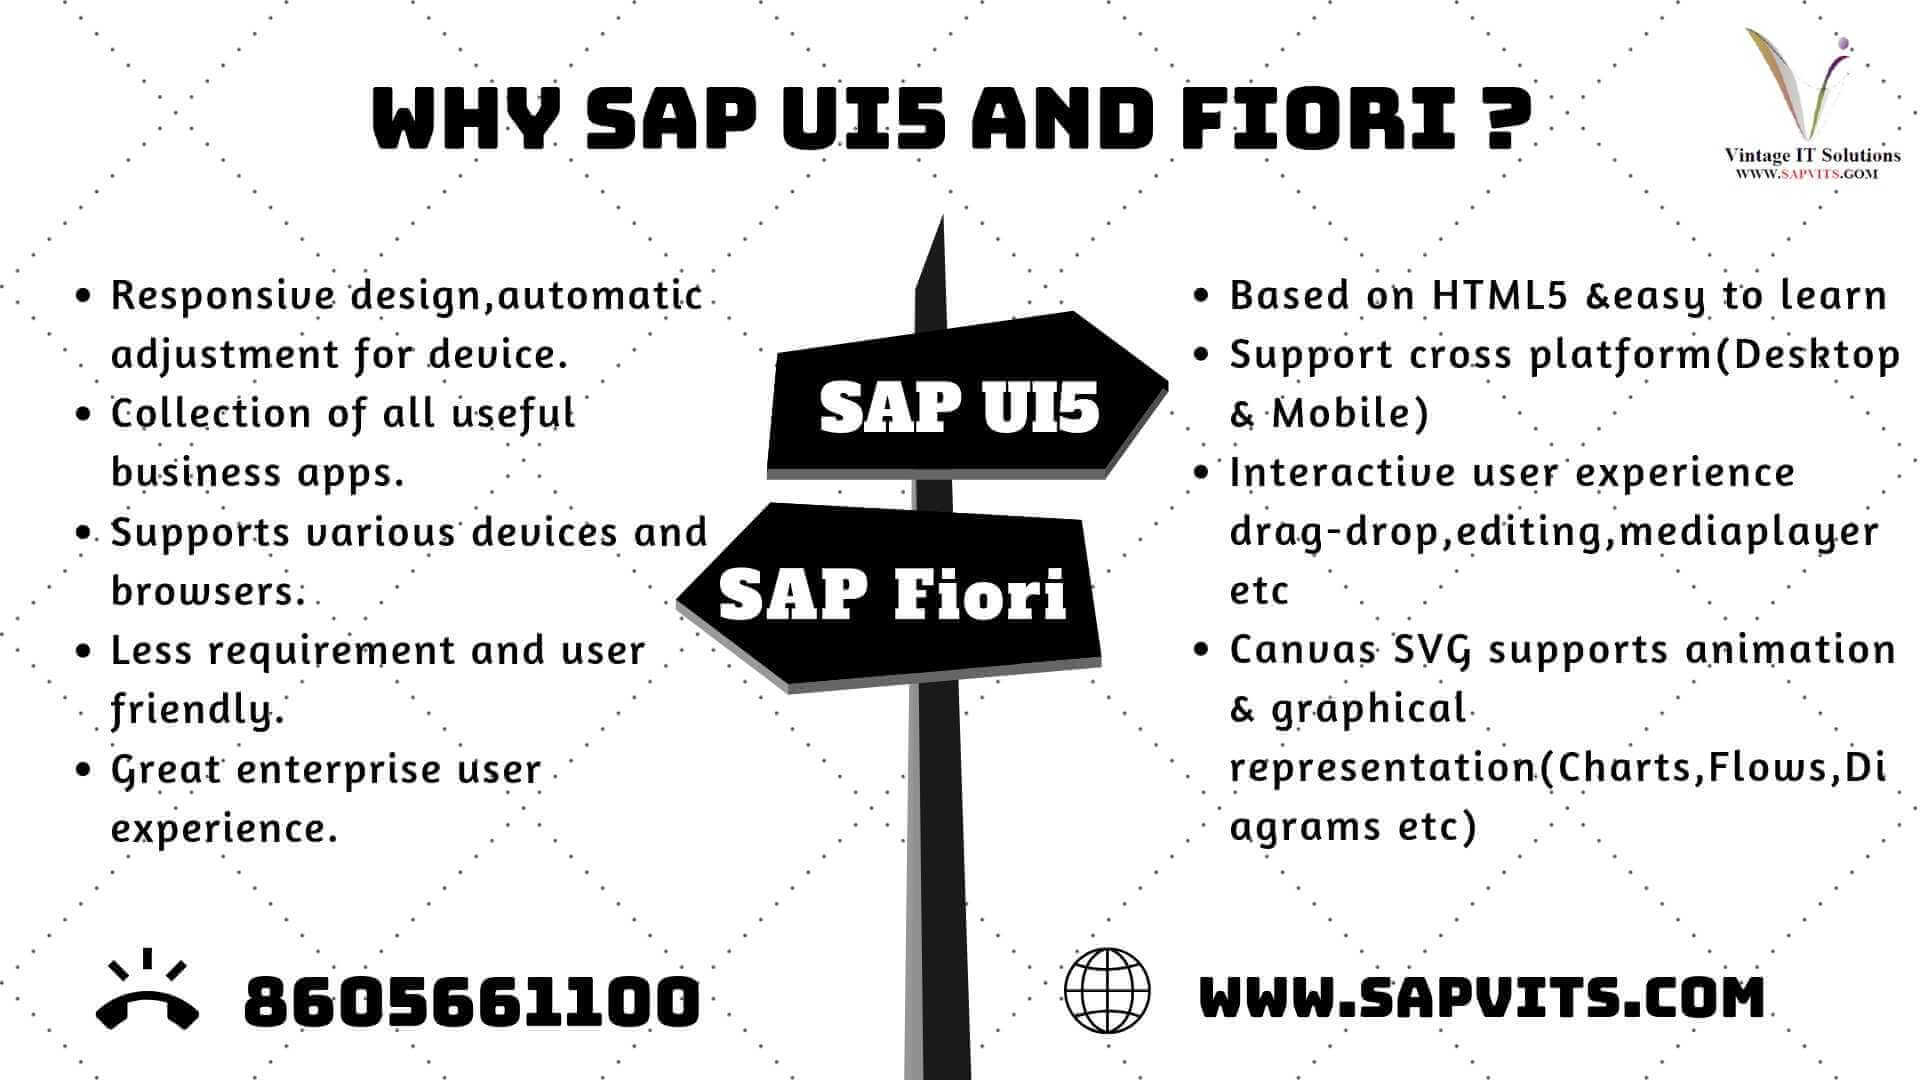 SAPUI5 Training in Hyderabad | SAP UI5 and Fiori Training course and certification